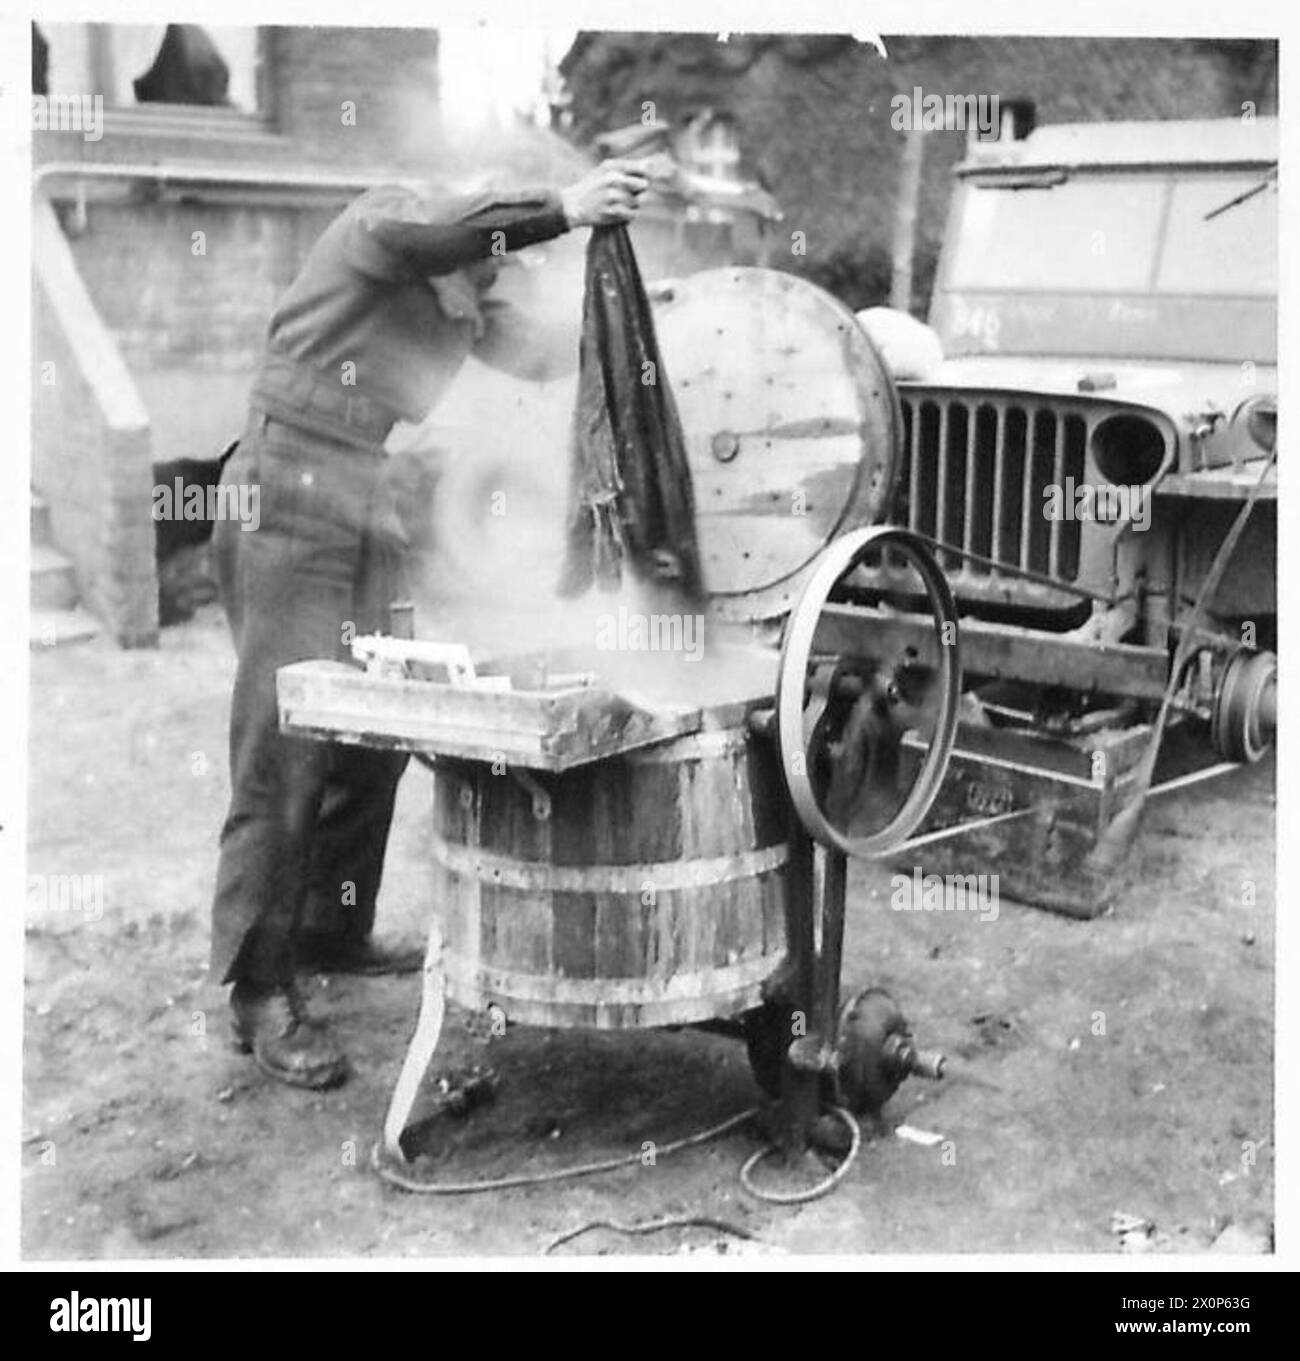 WASH DAY IN THE LINE ON GERMAN SOIL - The washing is finished in quick time and without effort and is not hung out to dry. Photographic negative , British Army, 21st Army Group Stock Photo